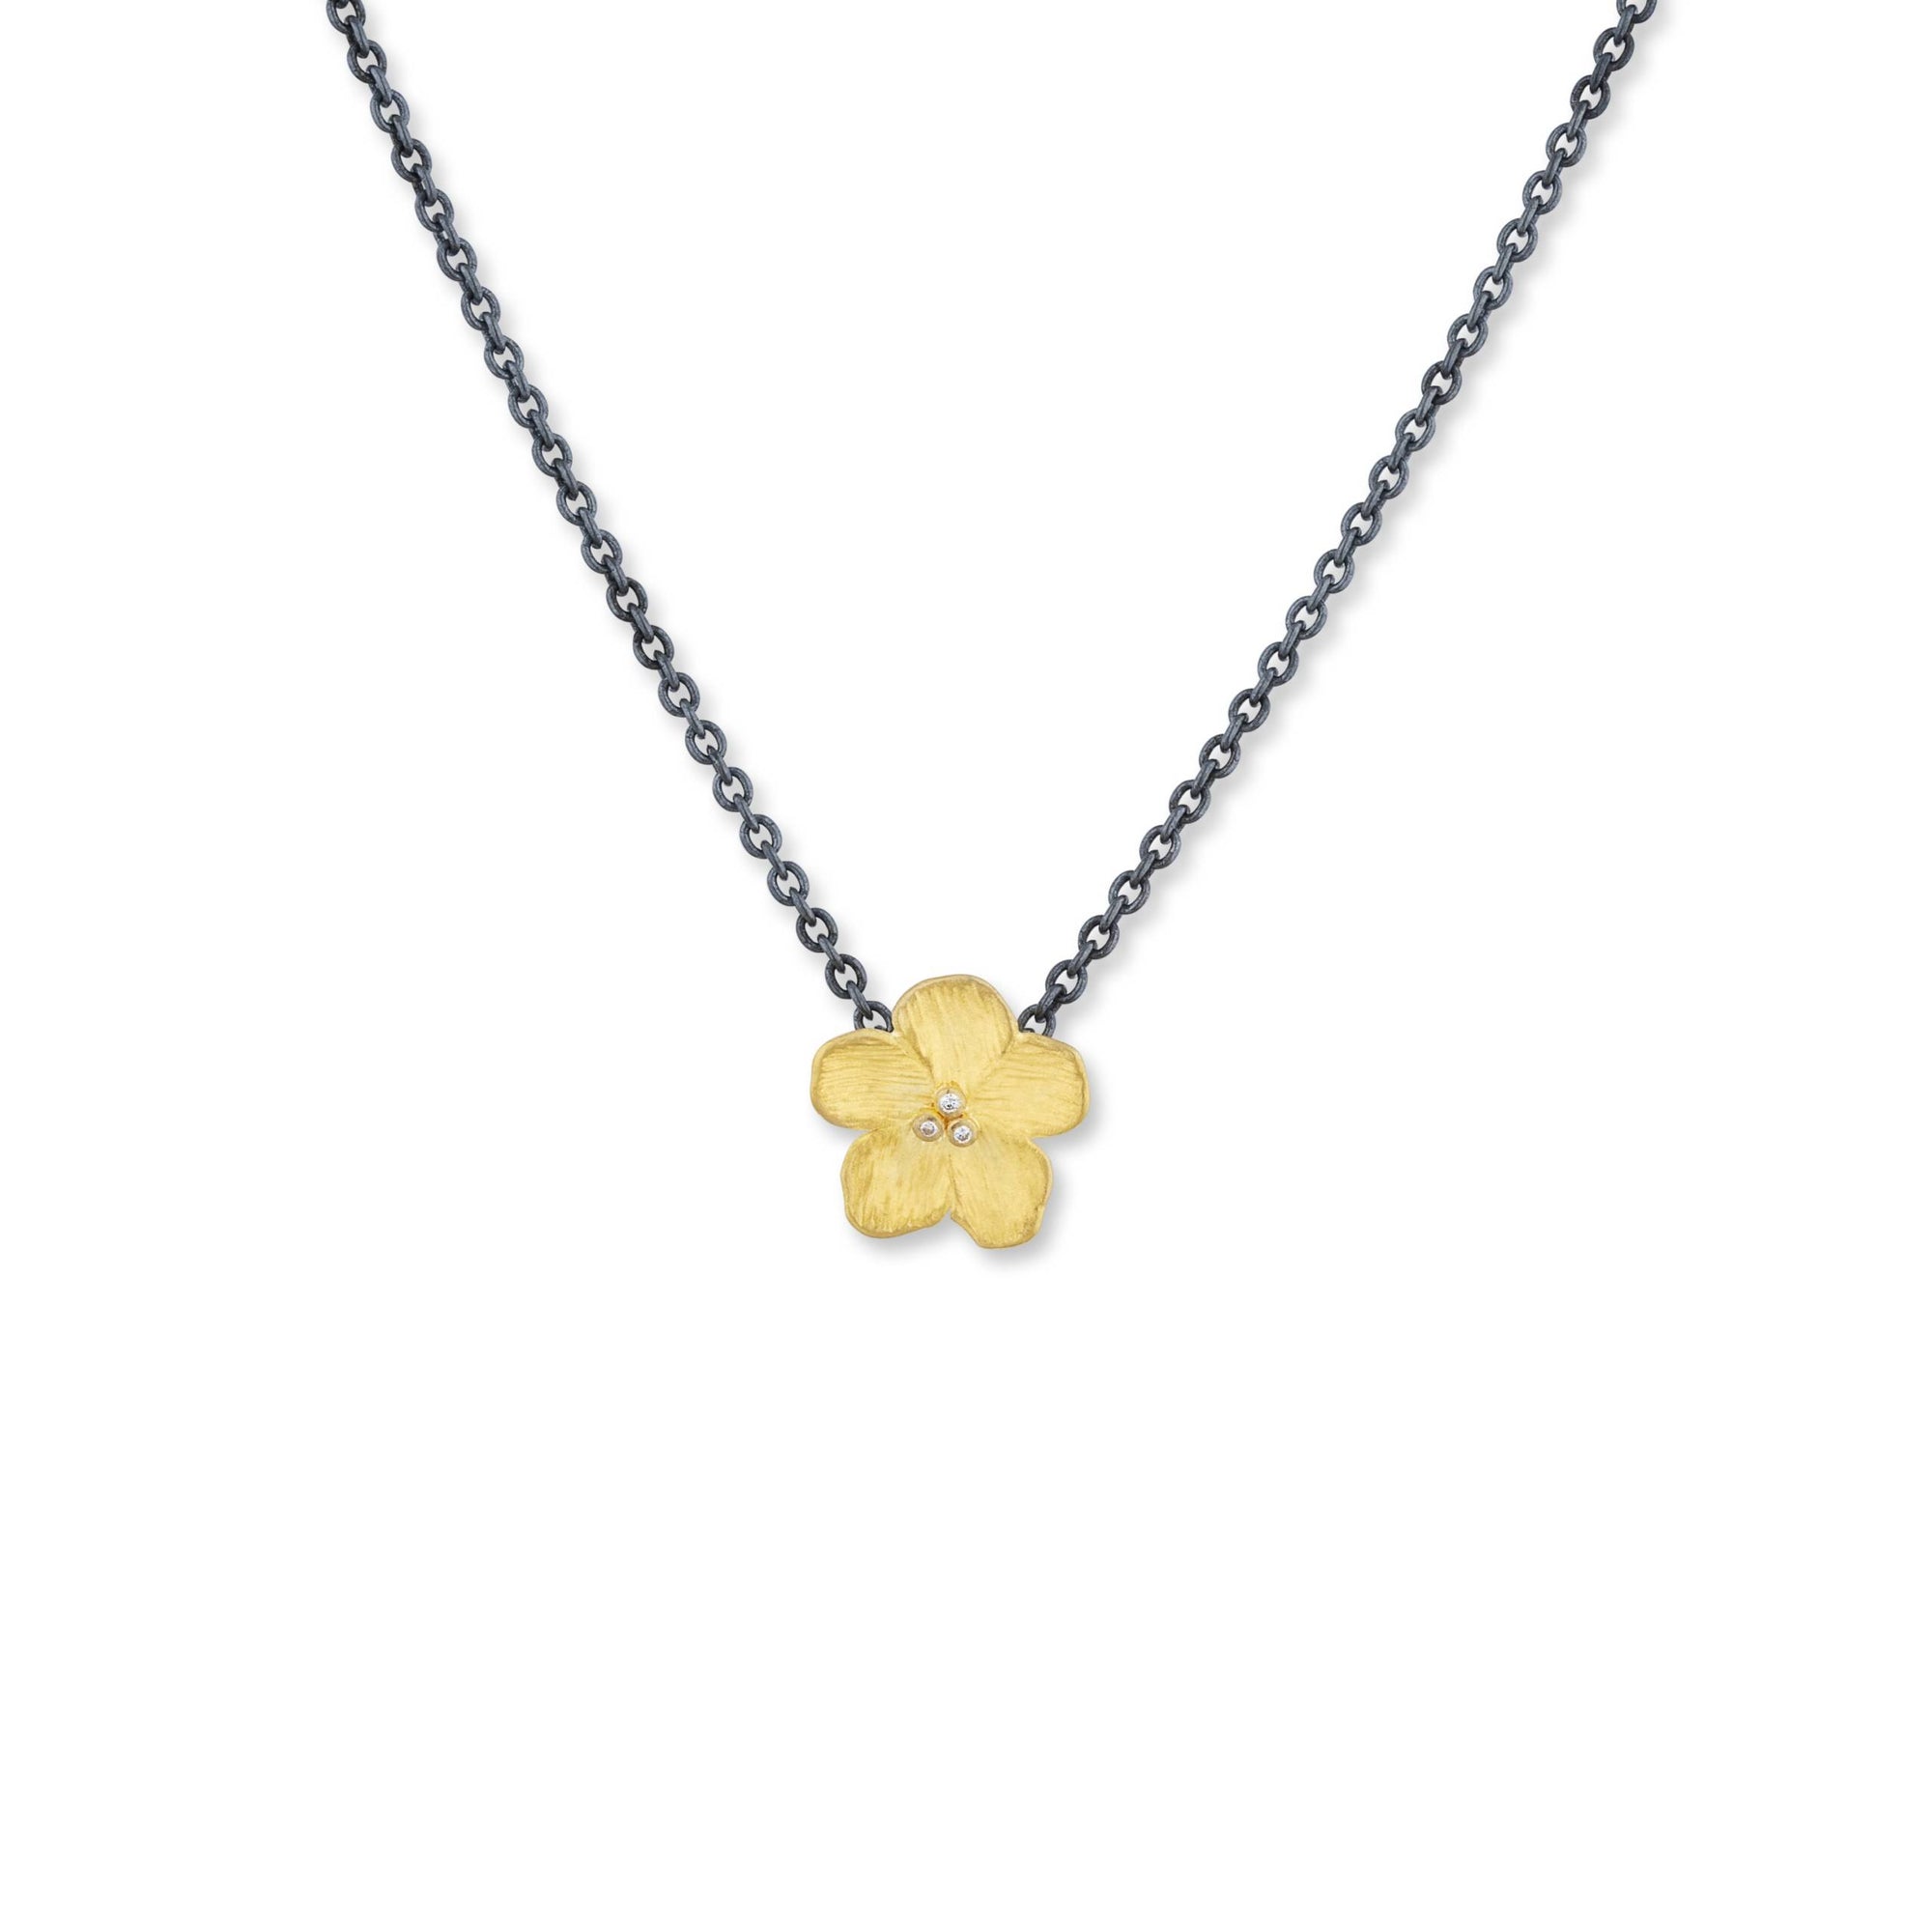 Lika Behar 22K Gold "Buttercup" Necklace with Diamond Accent